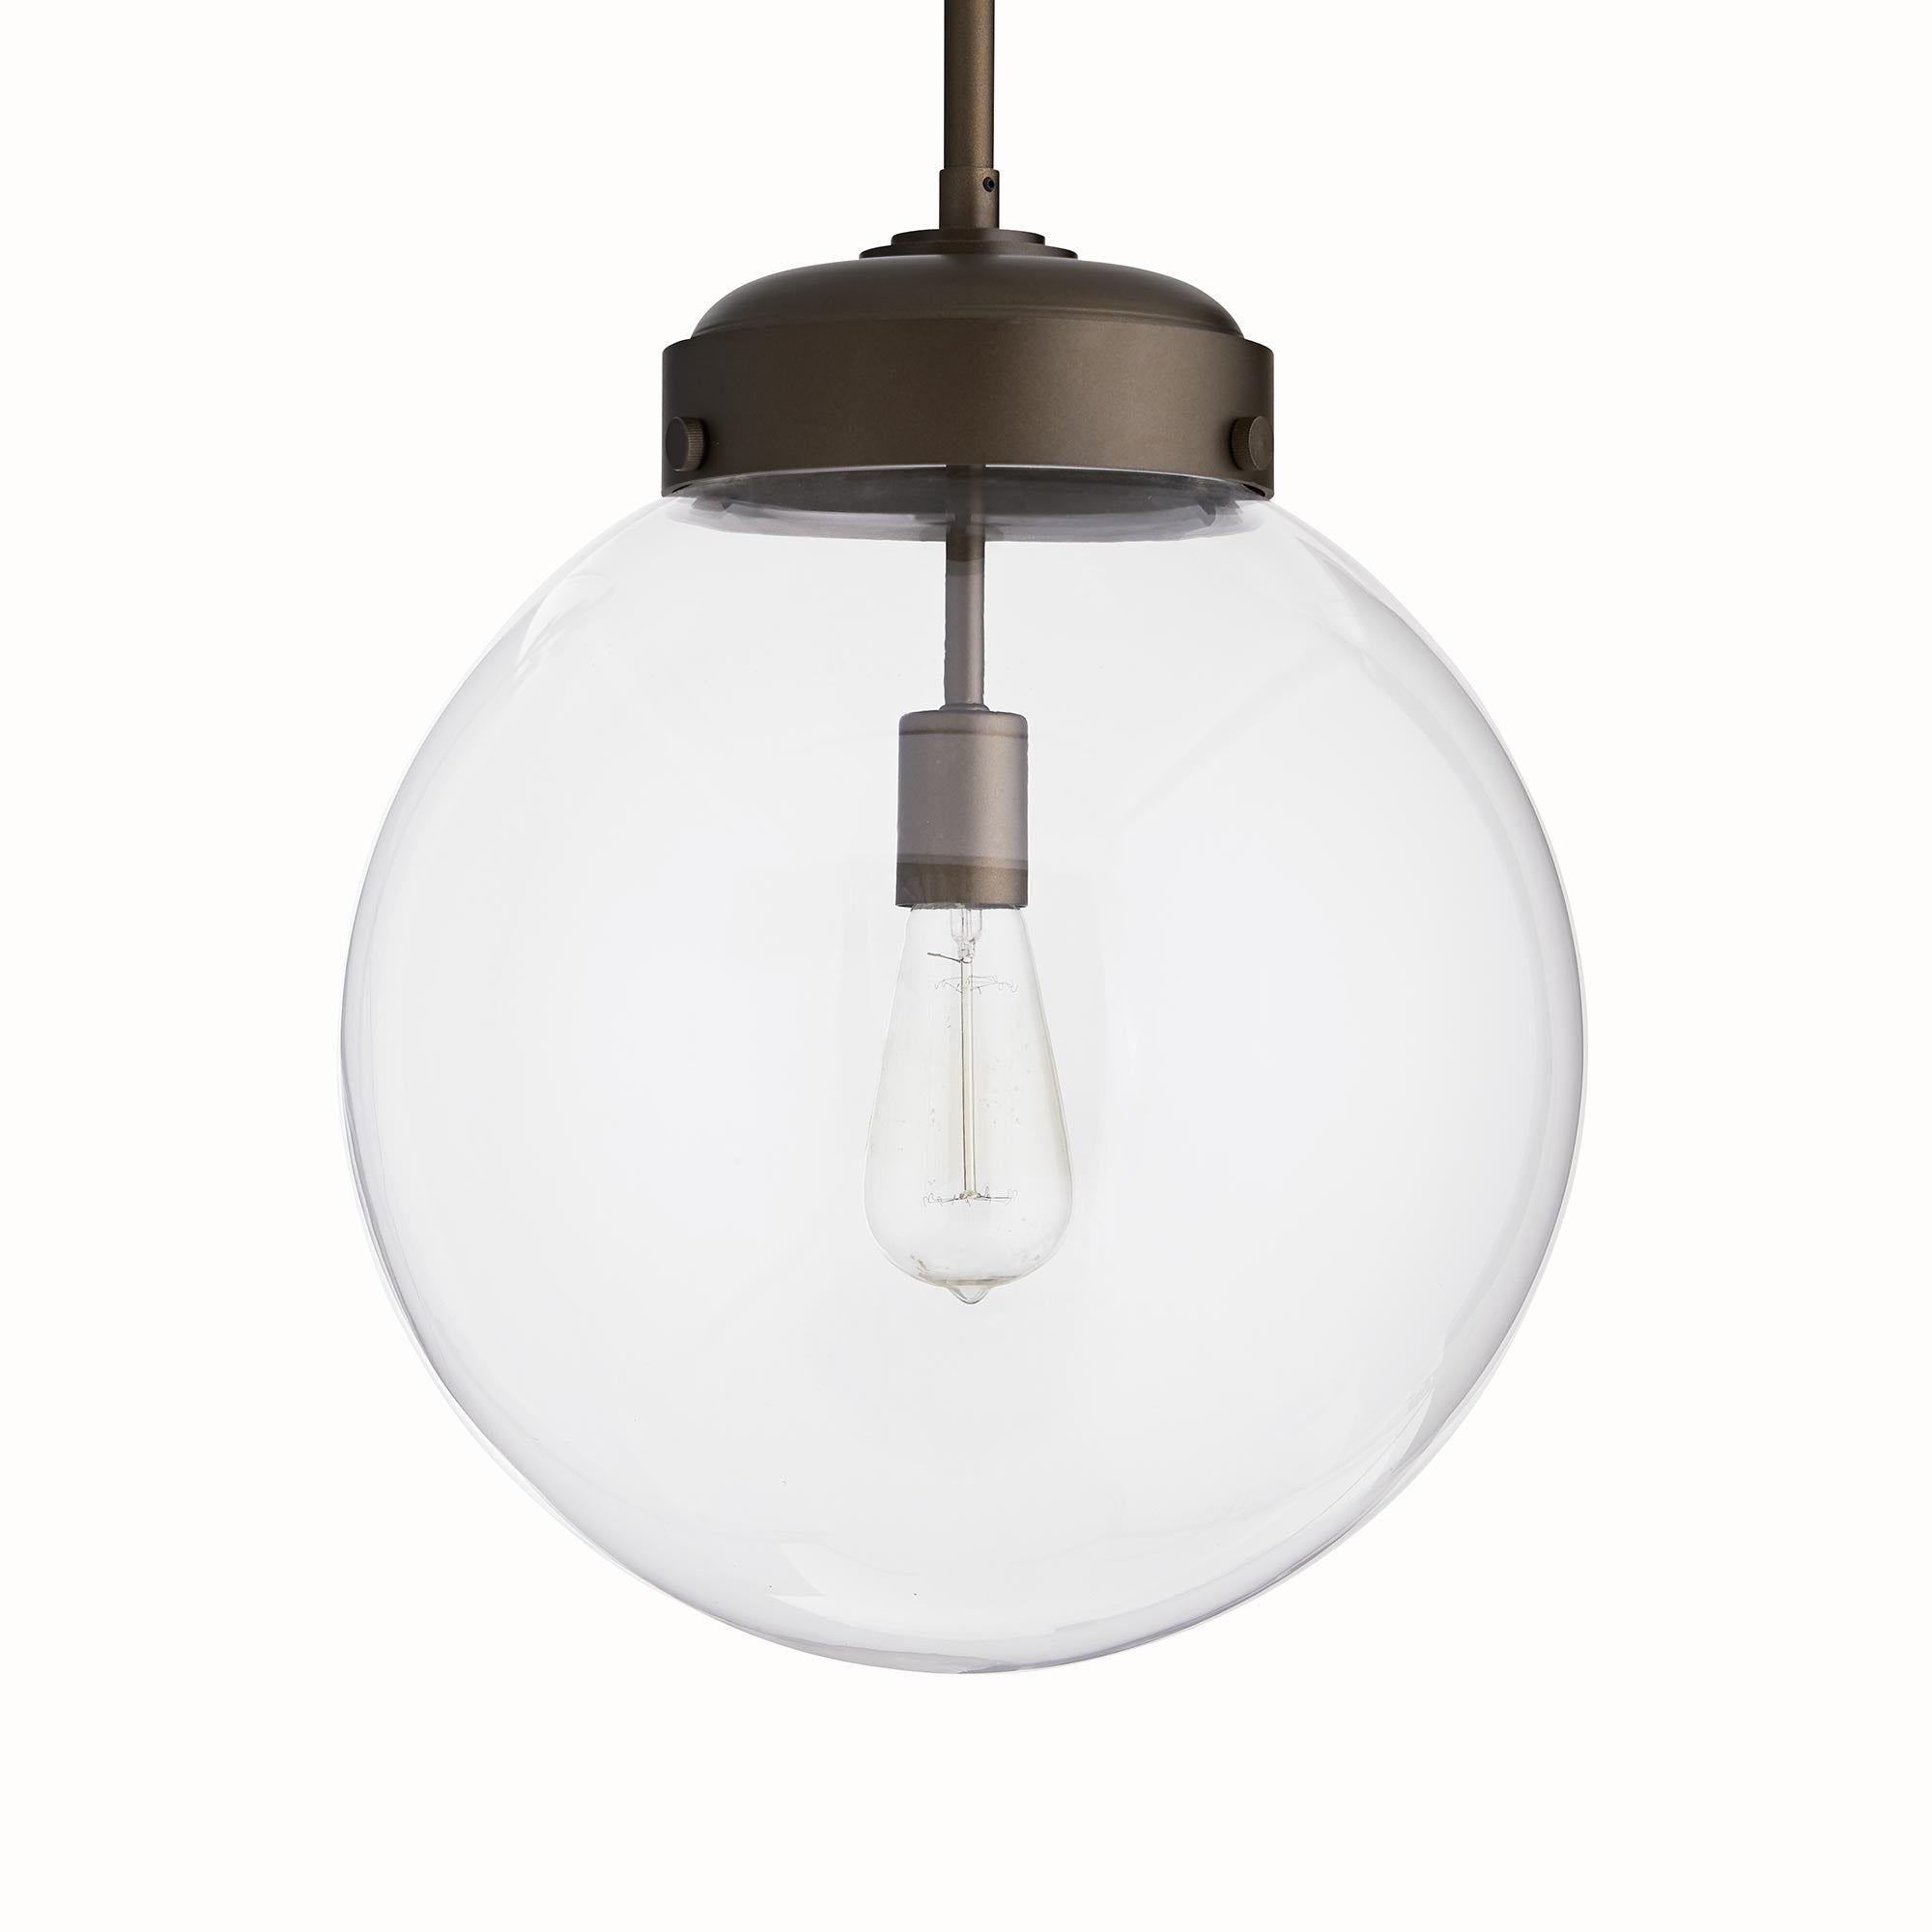 Arteriors Reeves Large Outdoor Pendant 49208